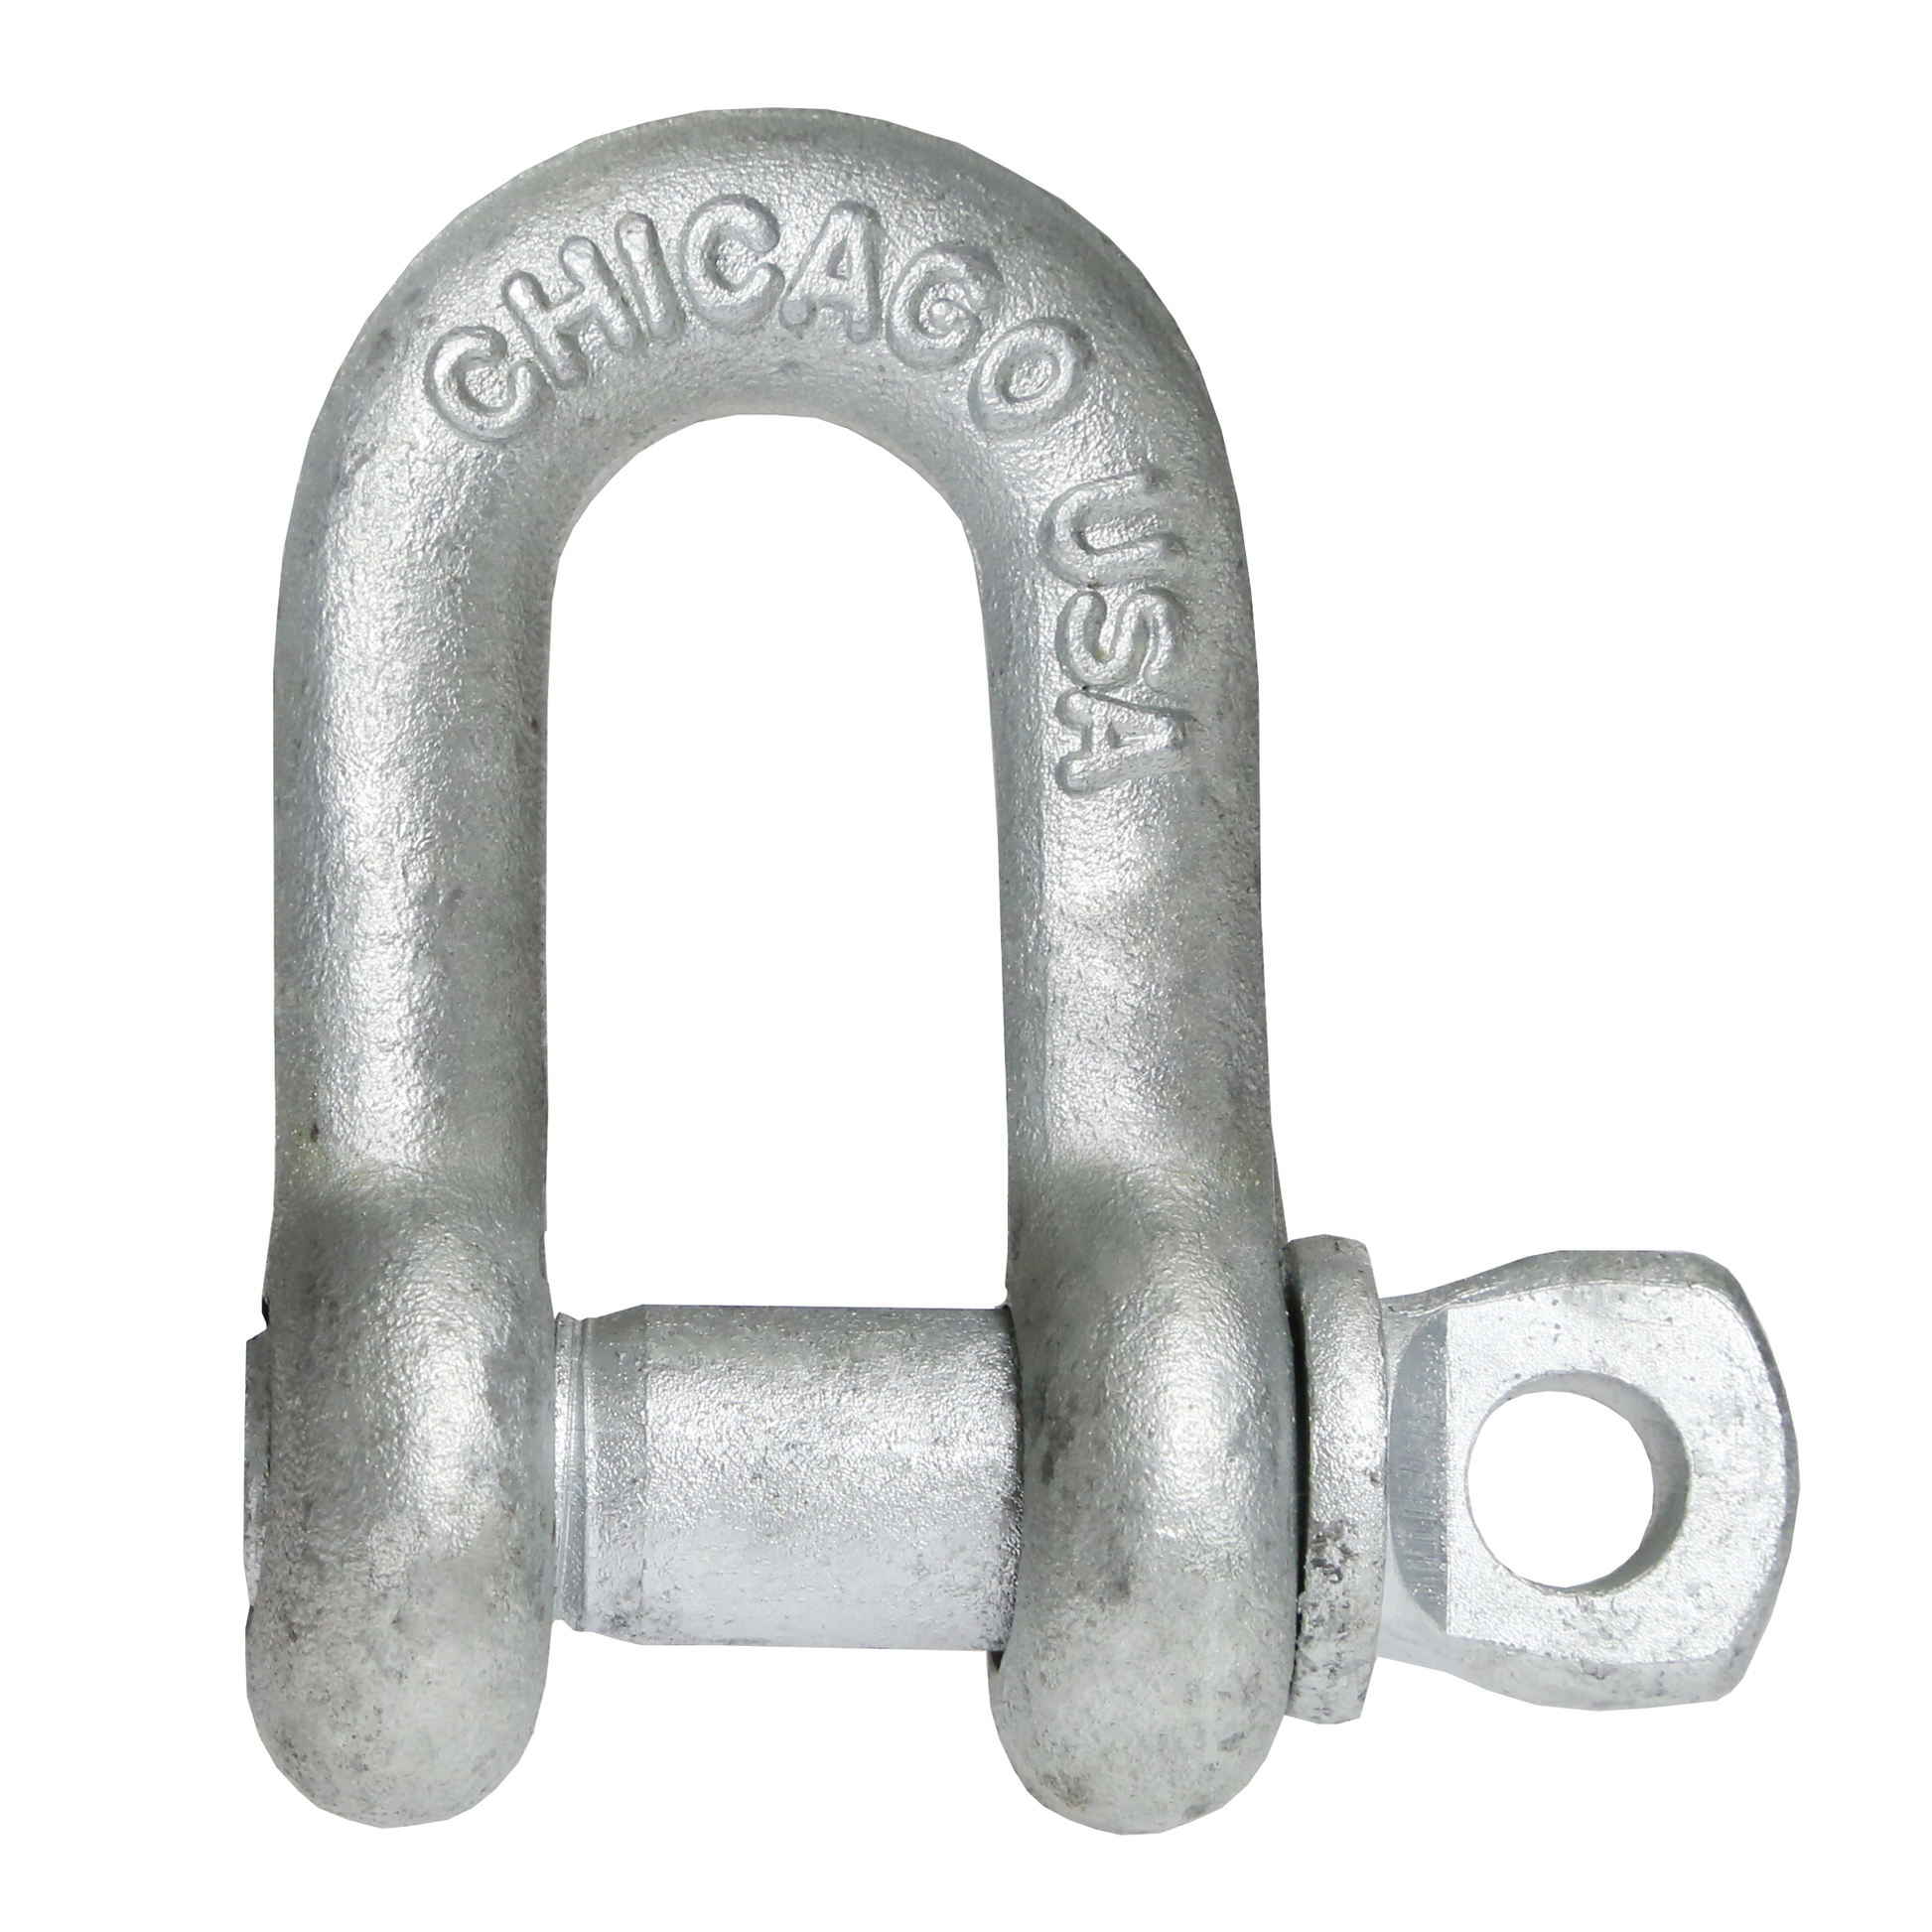 Screw Pin Chain Shackle - Chicago Hardware - 7/8" Galvanized Steel - 6.5 Ton primary image